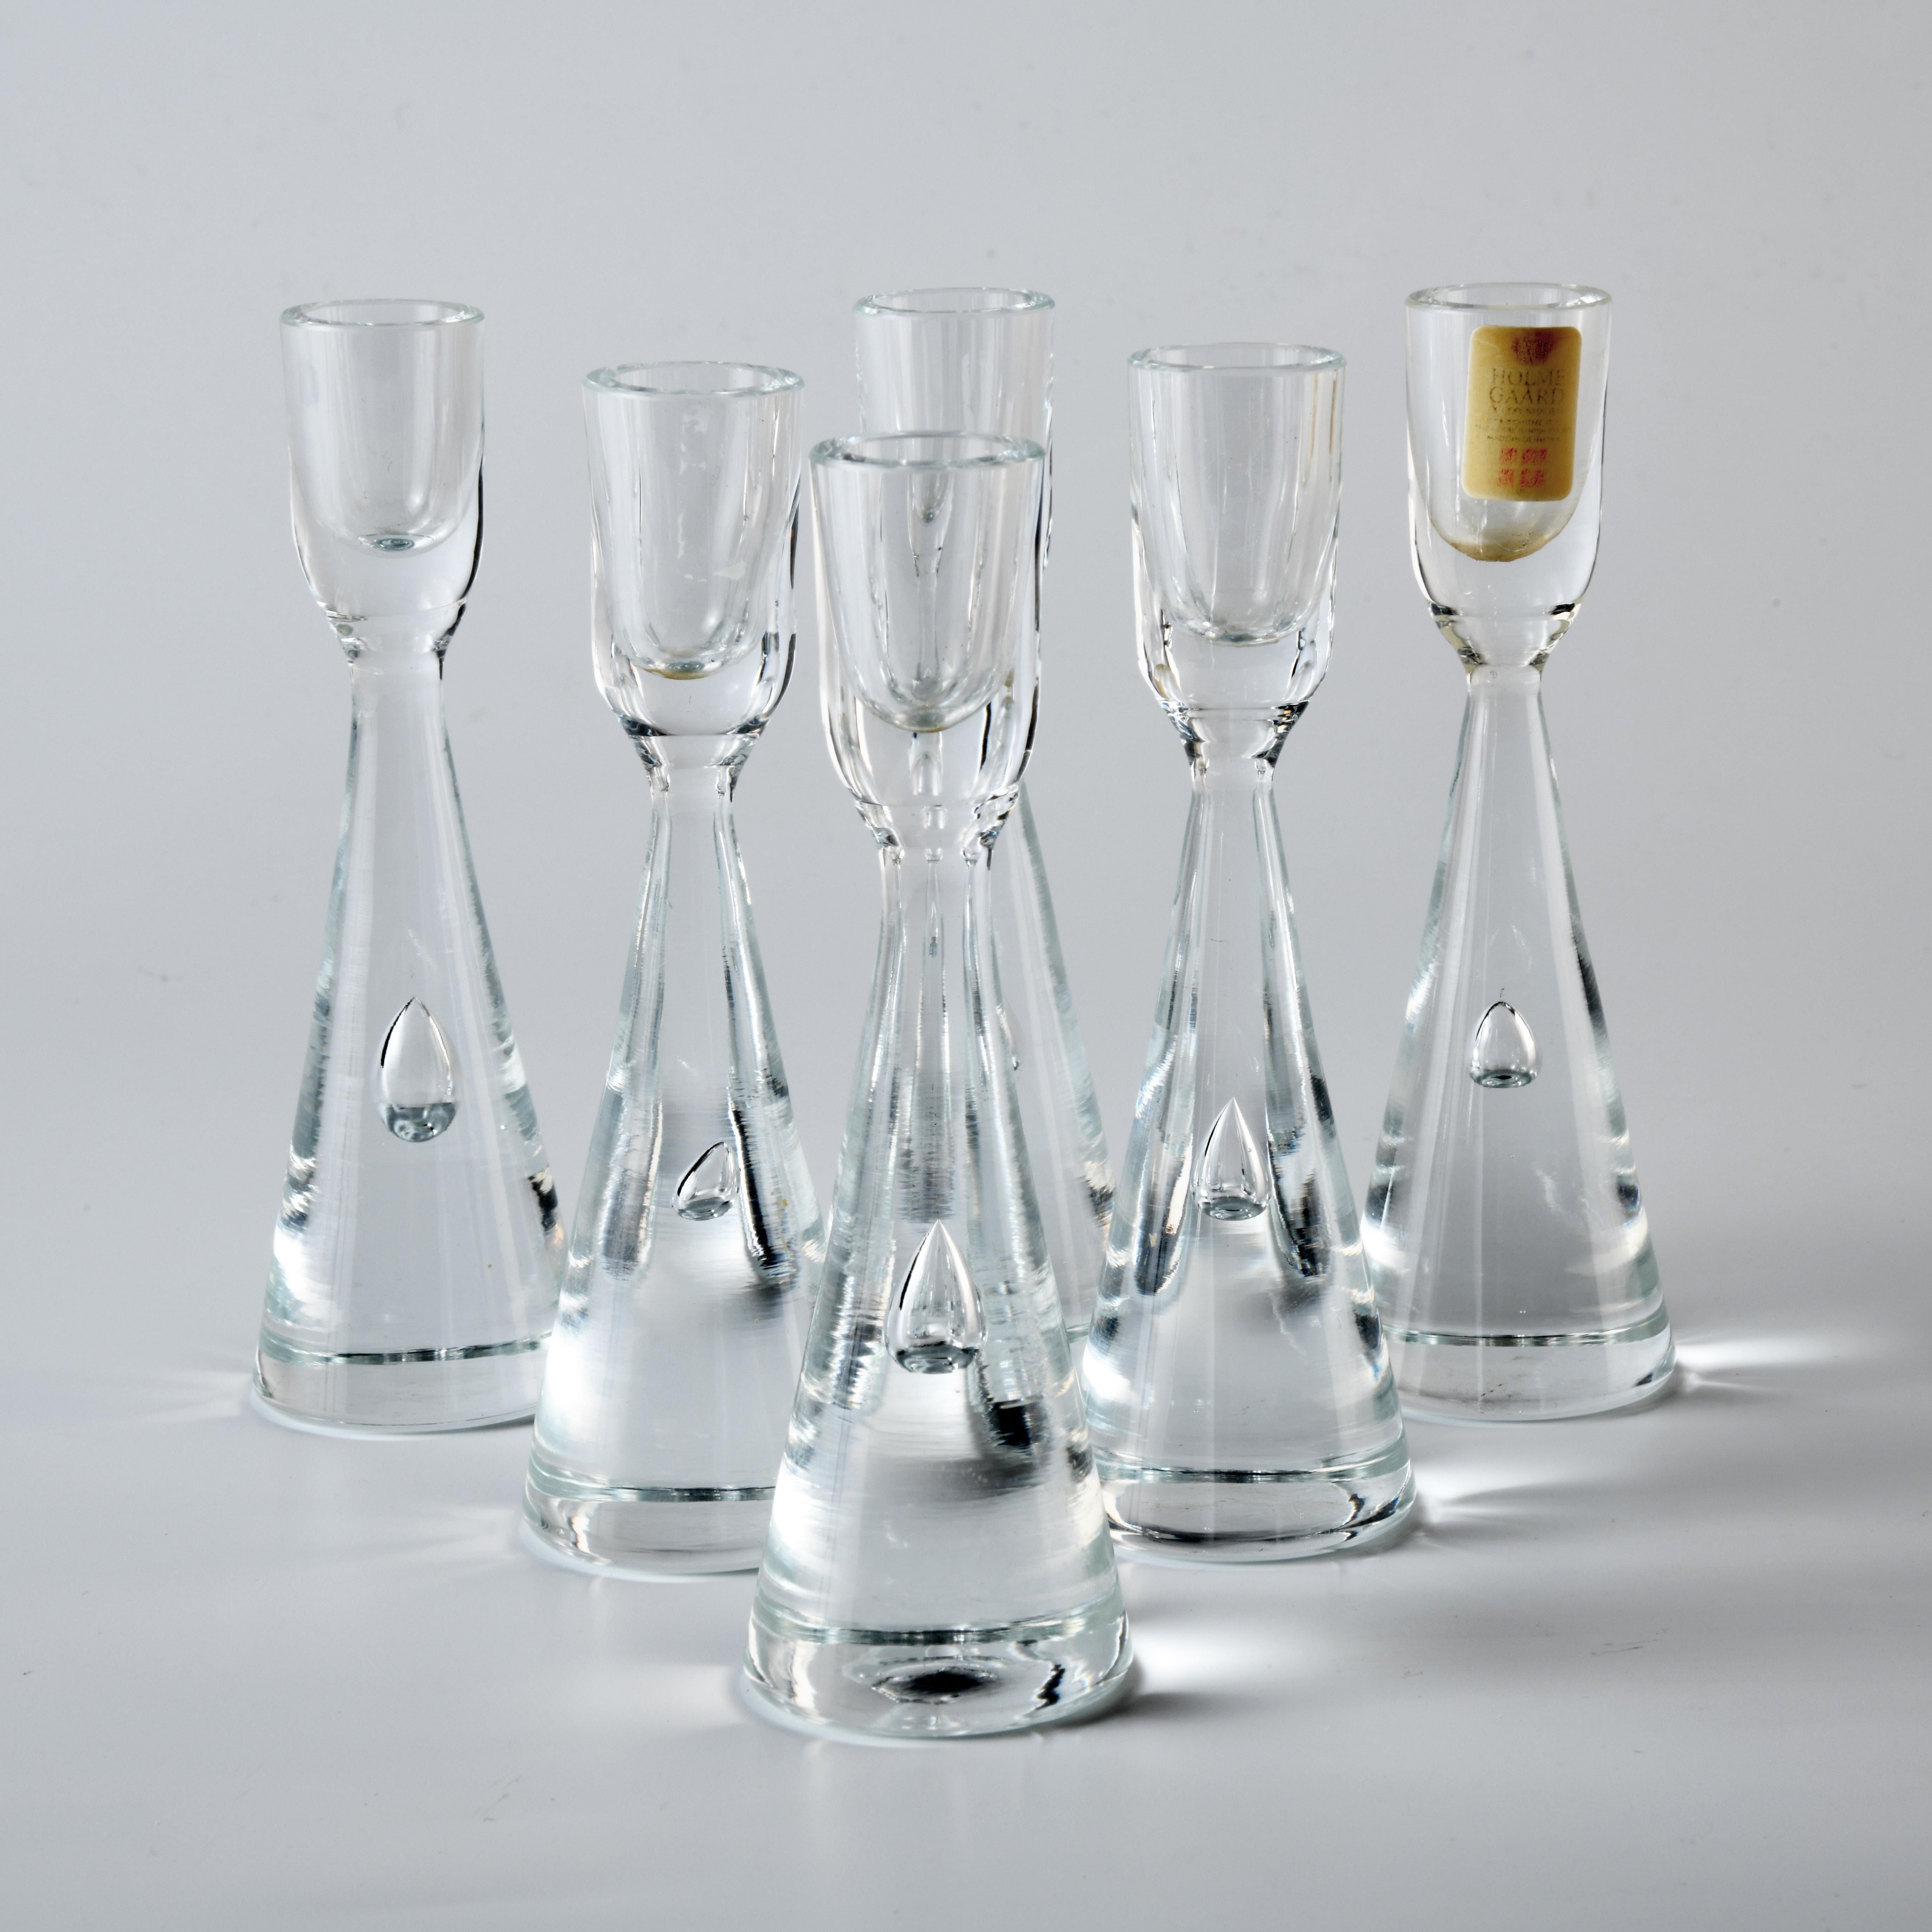 Danish 6 Individual Small Glass Candle Holders by Bent Severin for Holmegaard in 50s